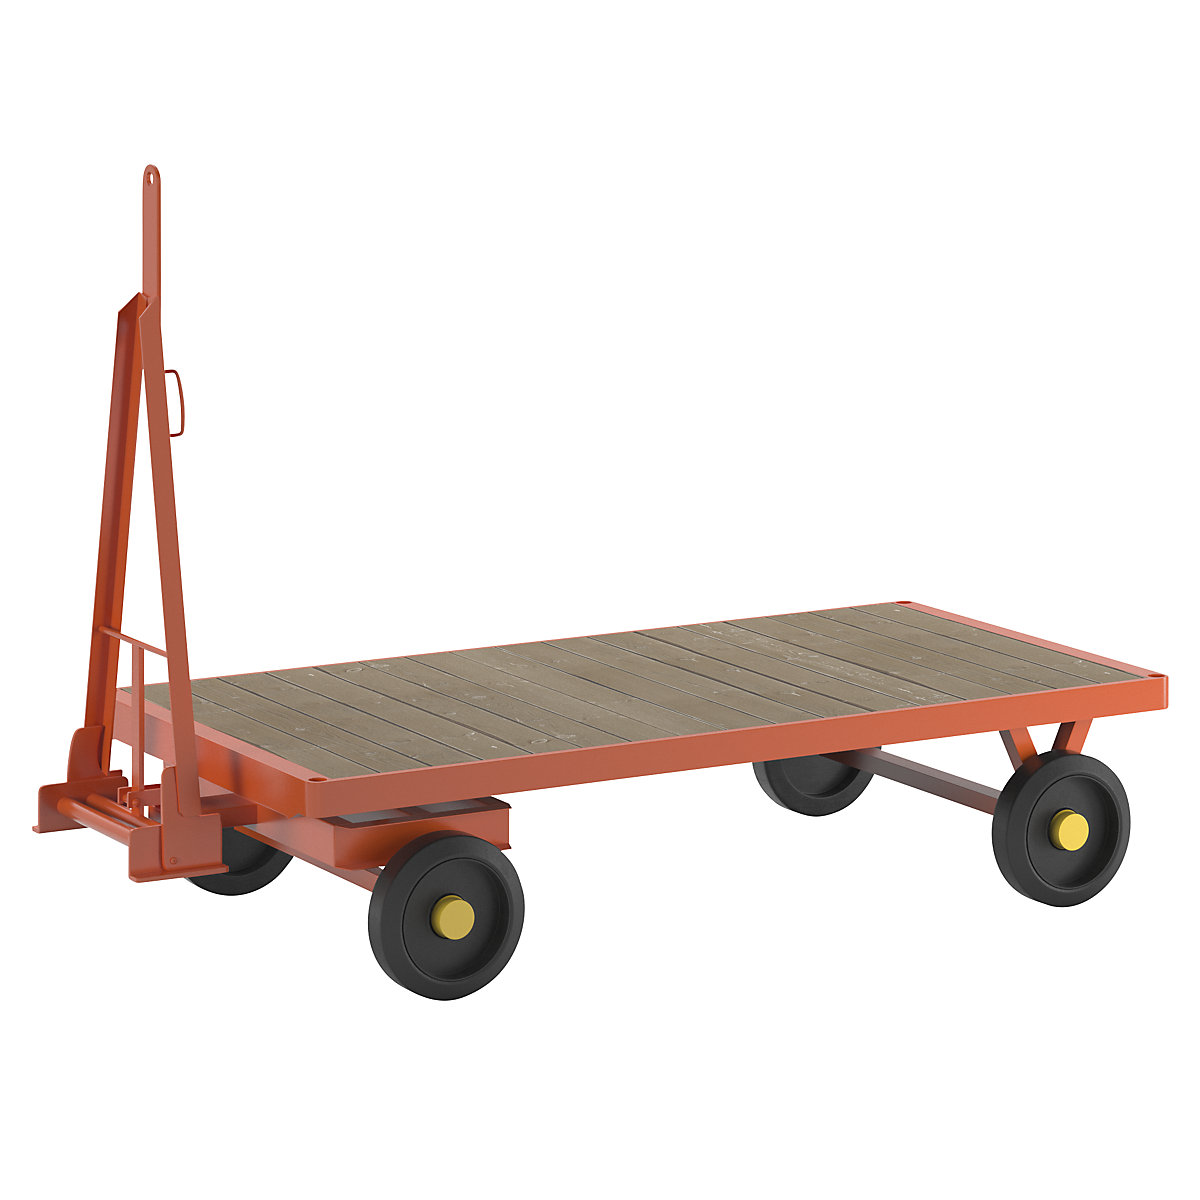 Trailer, 2-wheel turntable steering, max. load 3 t, platform 2.0 x 1.0 m, solid rubber tyres-3